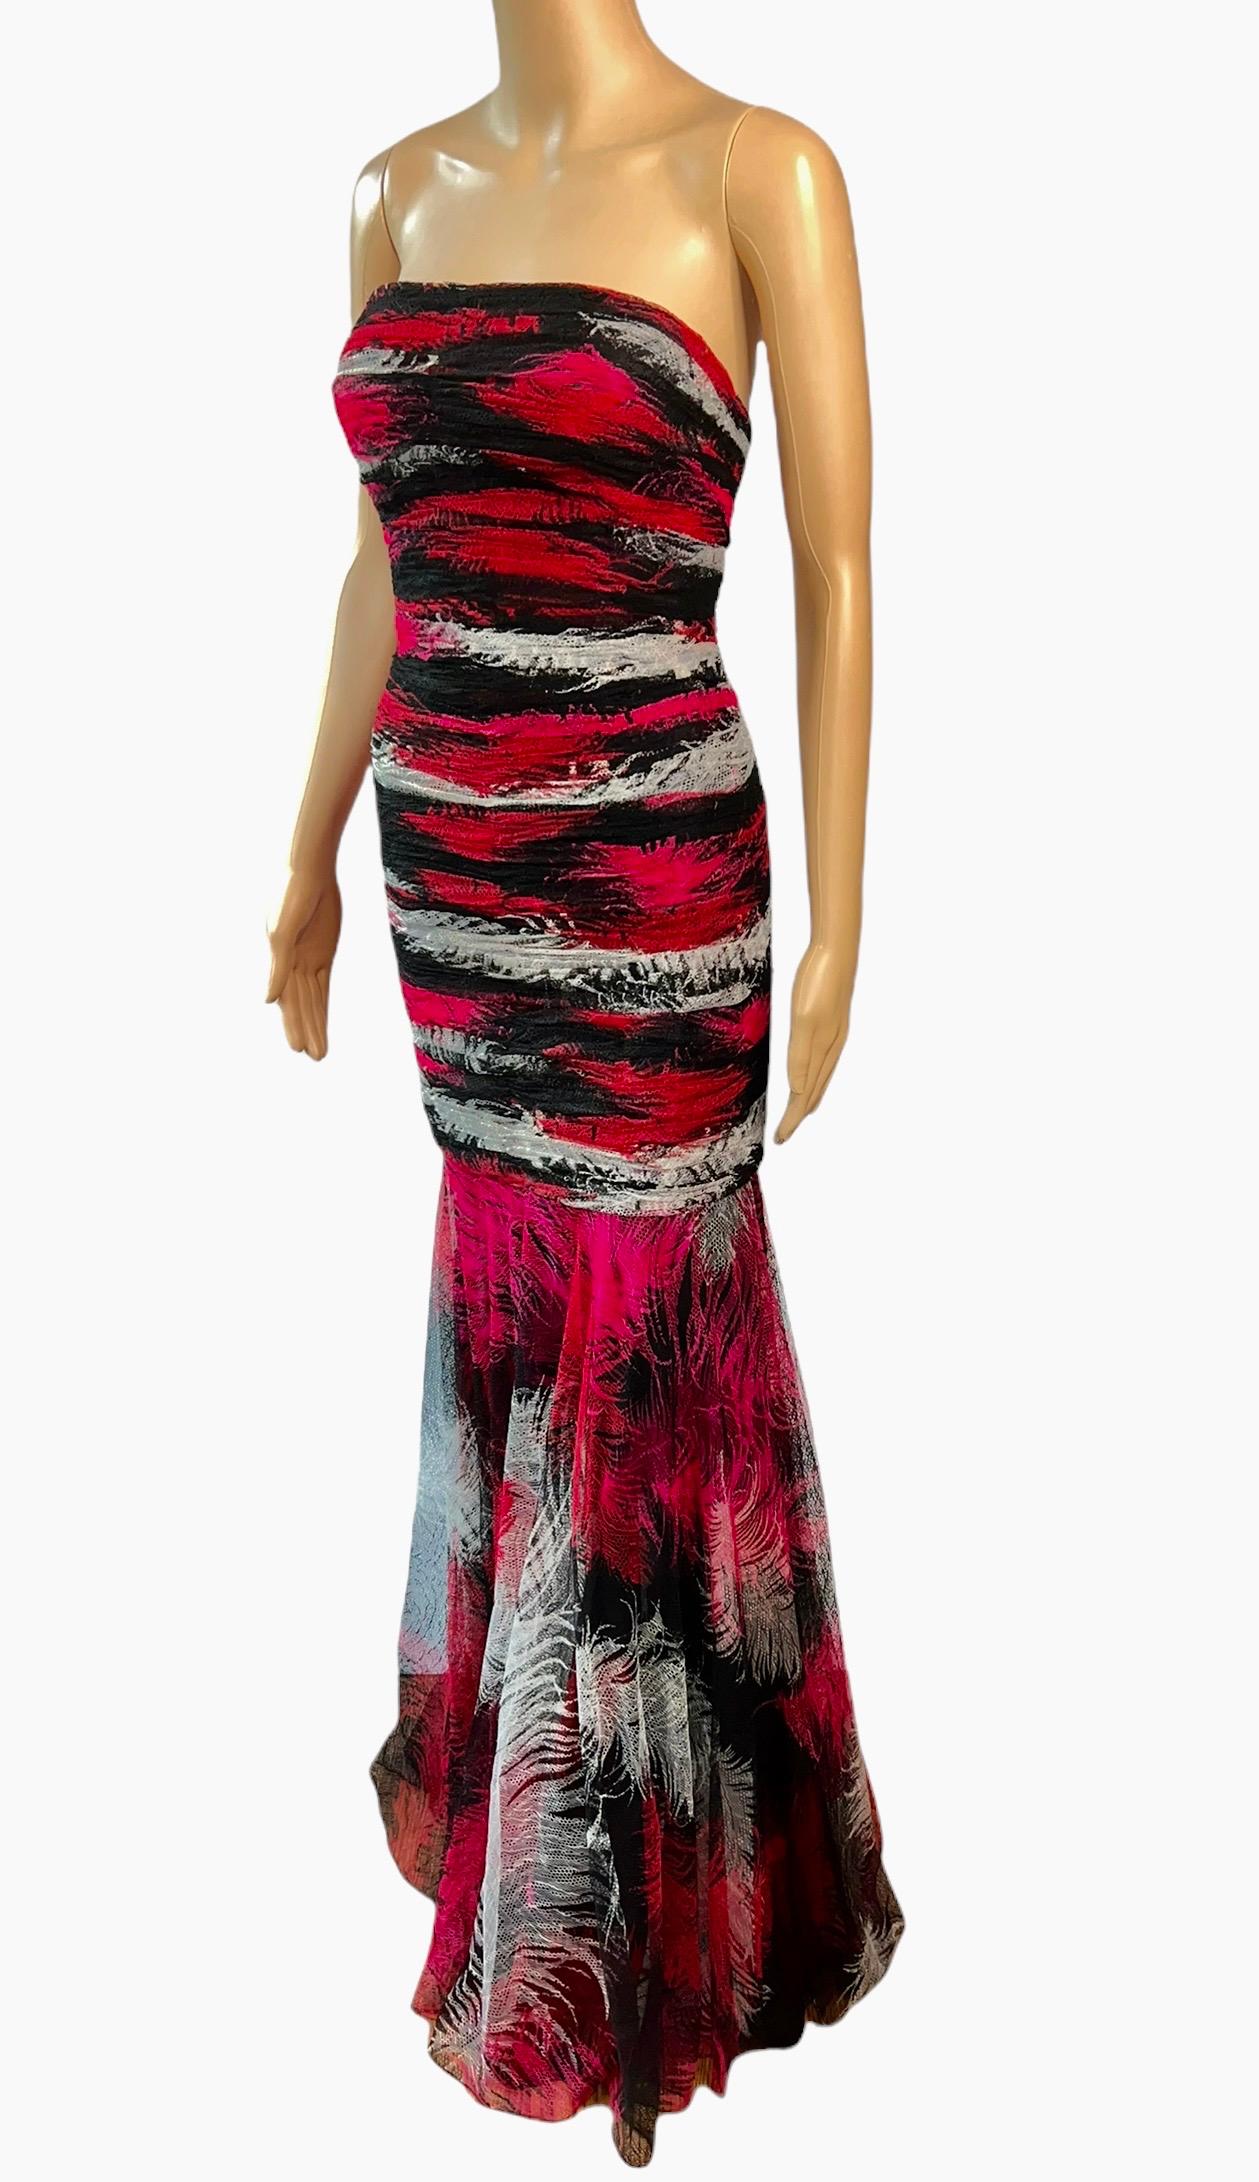 Women's Gianni Versace F/W 2001 Runway Bustier Feather Print Silk Evening Dress Gown For Sale